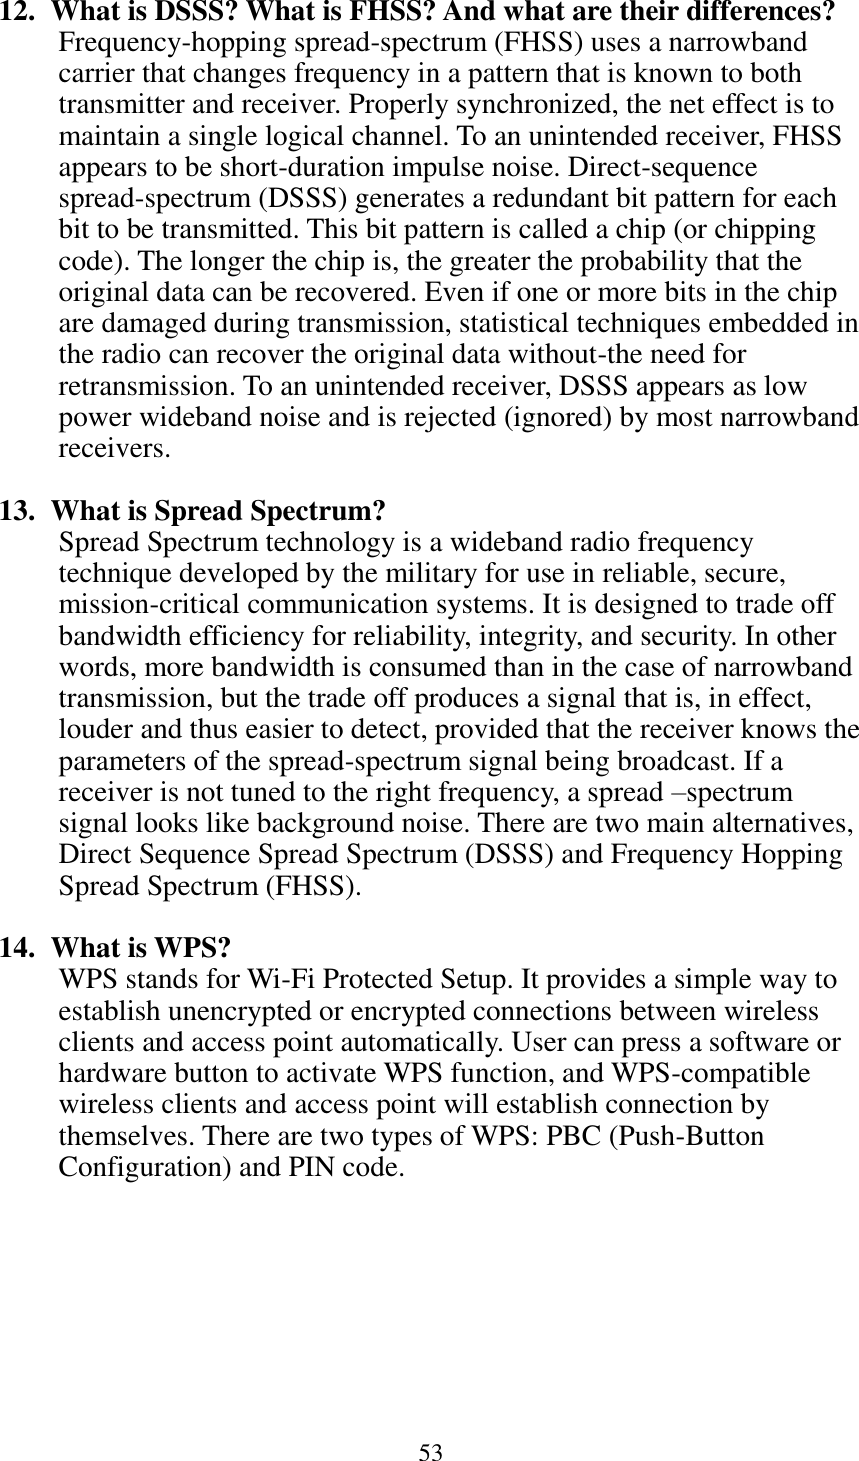 53  12.   What is DSSS? What is FHSS? And what are their differences? Frequency-hopping spread-spectrum (FHSS) uses a narrowband carrier that changes frequency in a pattern that is known to both transmitter and receiver. Properly synchronized, the net effect is to maintain a single logical channel. To an unintended receiver, FHSS appears to be short-duration impulse noise. Direct-sequence spread-spectrum (DSSS) generates a redundant bit pattern for each bit to be transmitted. This bit pattern is called a chip (or chipping code). The longer the chip is, the greater the probability that the original data can be recovered. Even if one or more bits in the chip are damaged during transmission, statistical techniques embedded in the radio can recover the original data without-the need for retransmission. To an unintended receiver, DSSS appears as low power wideband noise and is rejected (ignored) by most narrowband receivers.  13.   What is Spread Spectrum? Spread Spectrum technology is a wideband radio frequency technique developed by the military for use in reliable, secure, mission-critical communication systems. It is designed to trade off bandwidth efficiency for reliability, integrity, and security. In other words, more bandwidth is consumed than in the case of narrowband transmission, but the trade off produces a signal that is, in effect, louder and thus easier to detect, provided that the receiver knows the parameters of the spread-spectrum signal being broadcast. If a receiver is not tuned to the right frequency, a spread –spectrum signal looks like background noise. There are two main alternatives, Direct Sequence Spread Spectrum (DSSS) and Frequency Hopping Spread Spectrum (FHSS).  14.   What is WPS? WPS stands for Wi-Fi Protected Setup. It provides a simple way to establish unencrypted or encrypted connections between wireless clients and access point automatically. User can press a software or hardware button to activate WPS function, and WPS-compatible wireless clients and access point will establish connection by themselves. There are two types of WPS: PBC (Push-Button Configuration) and PIN code.  